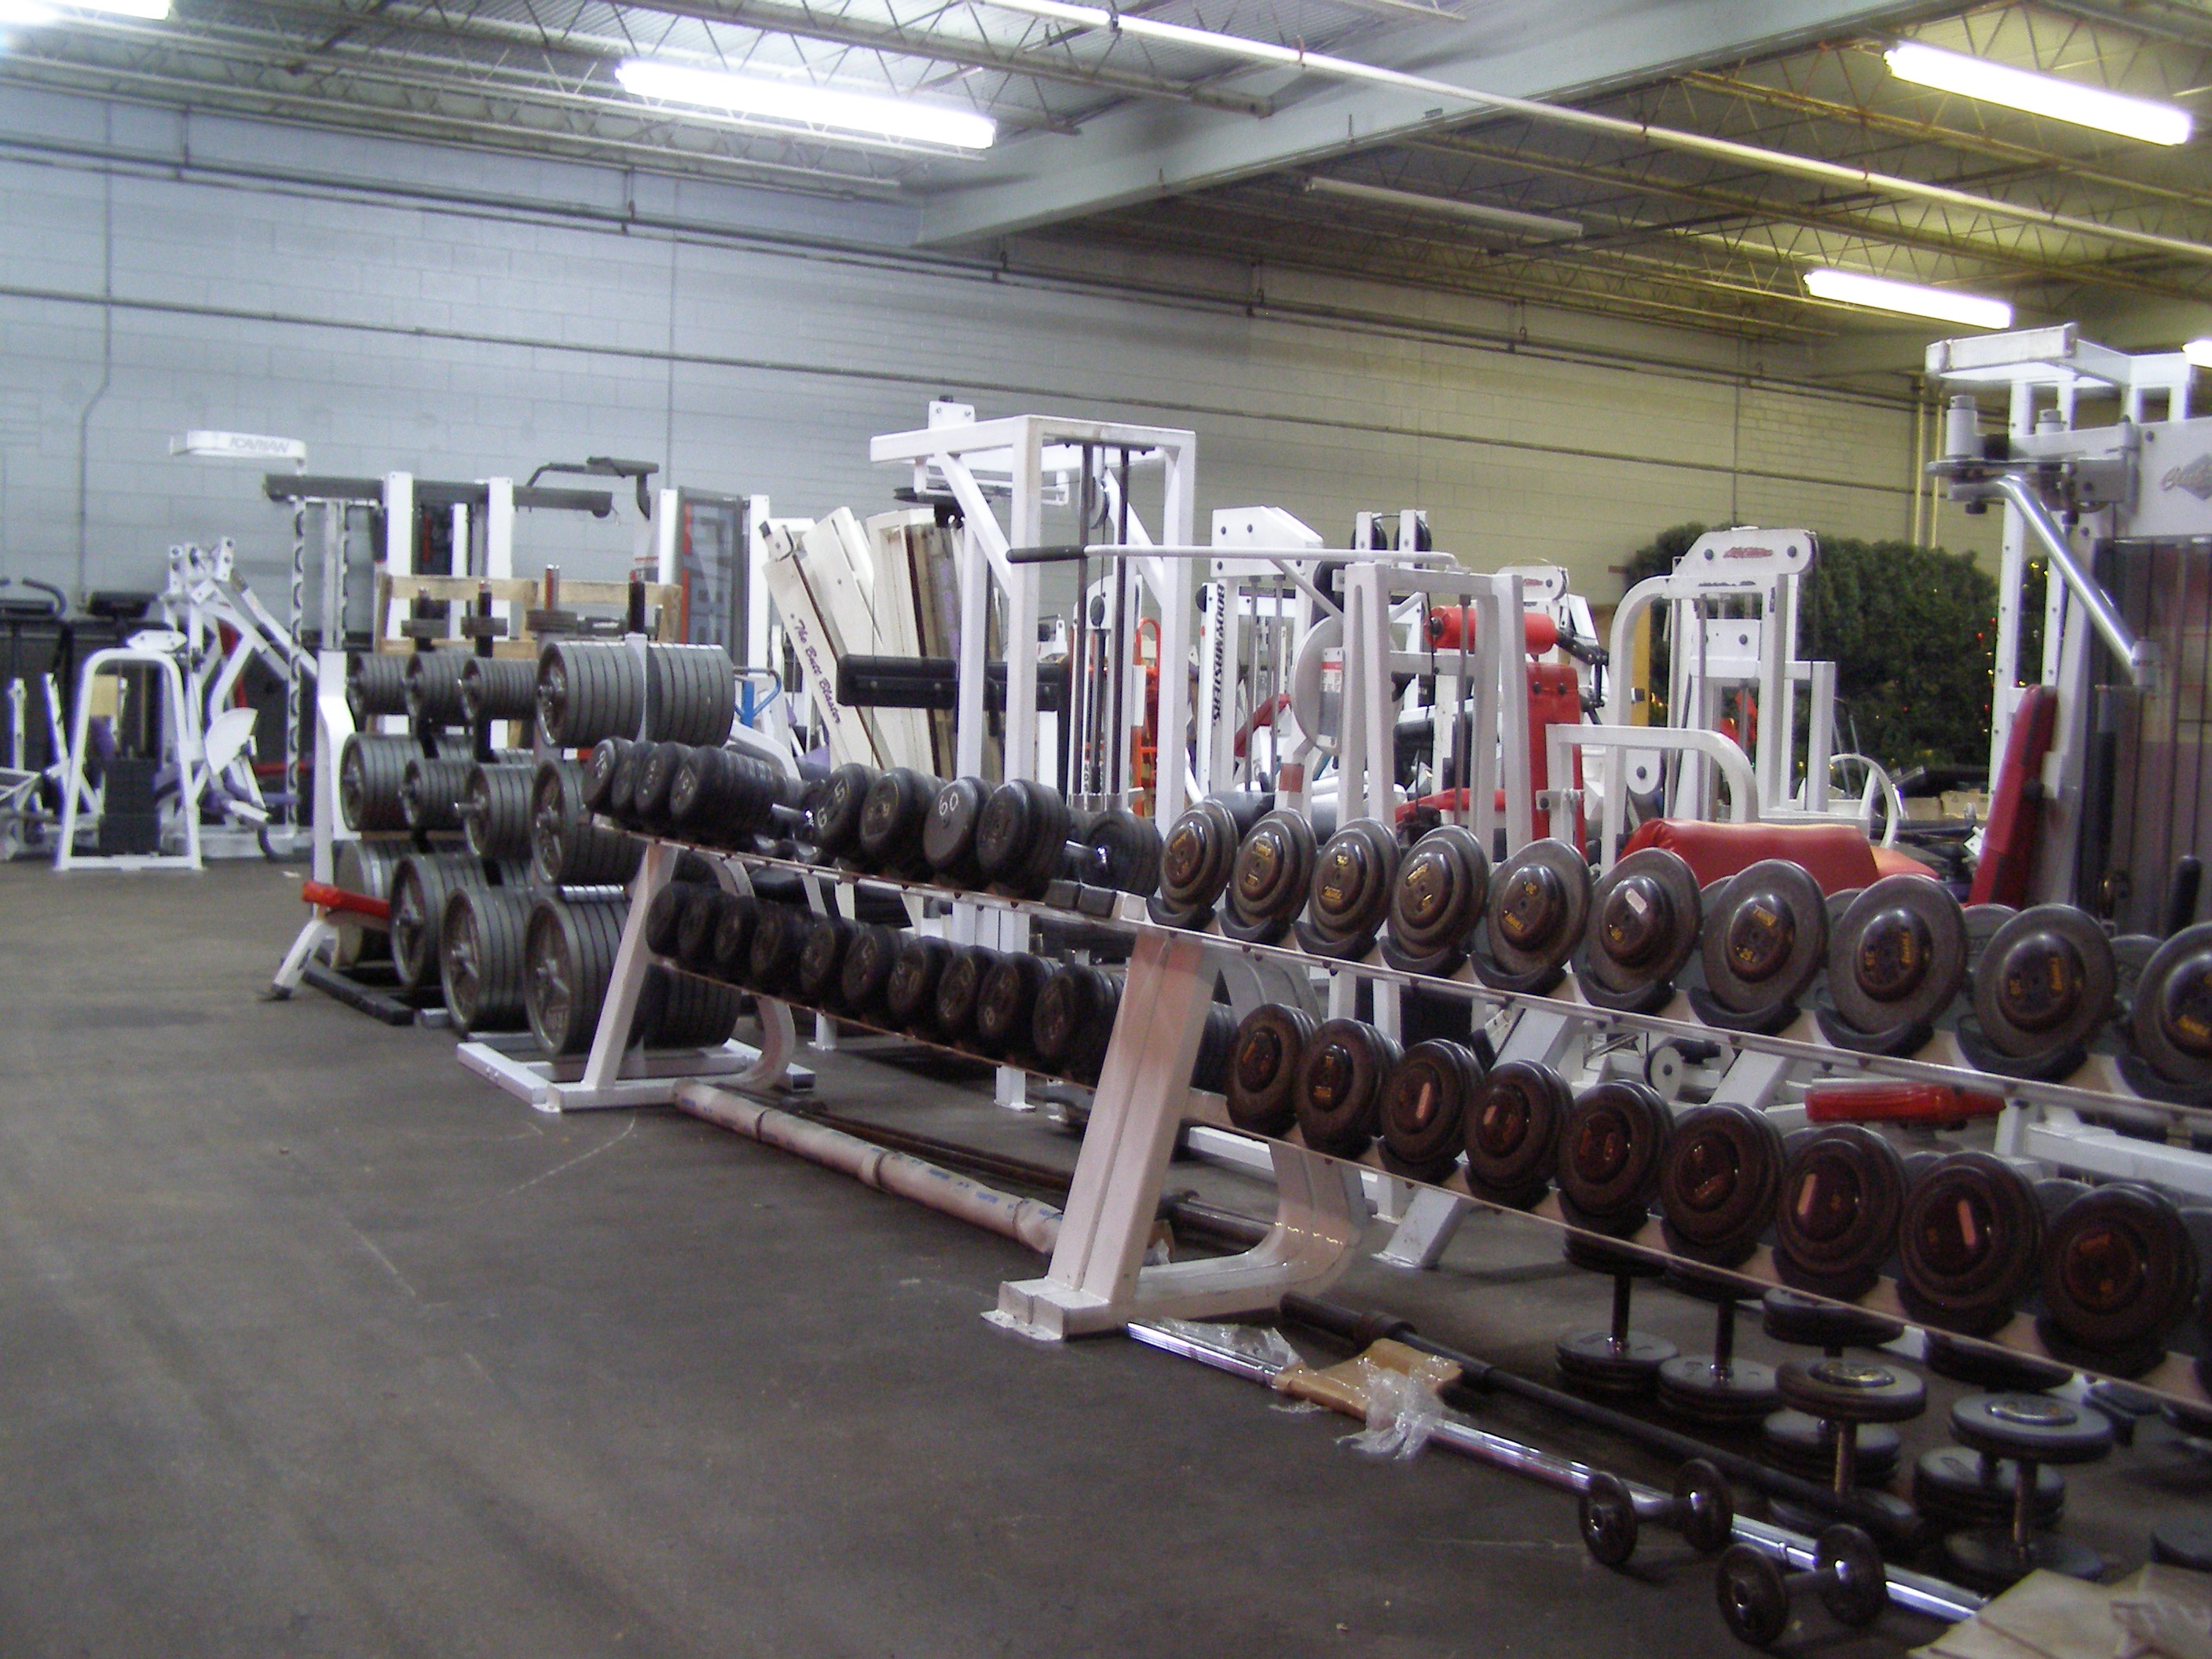 gym equipment for sale